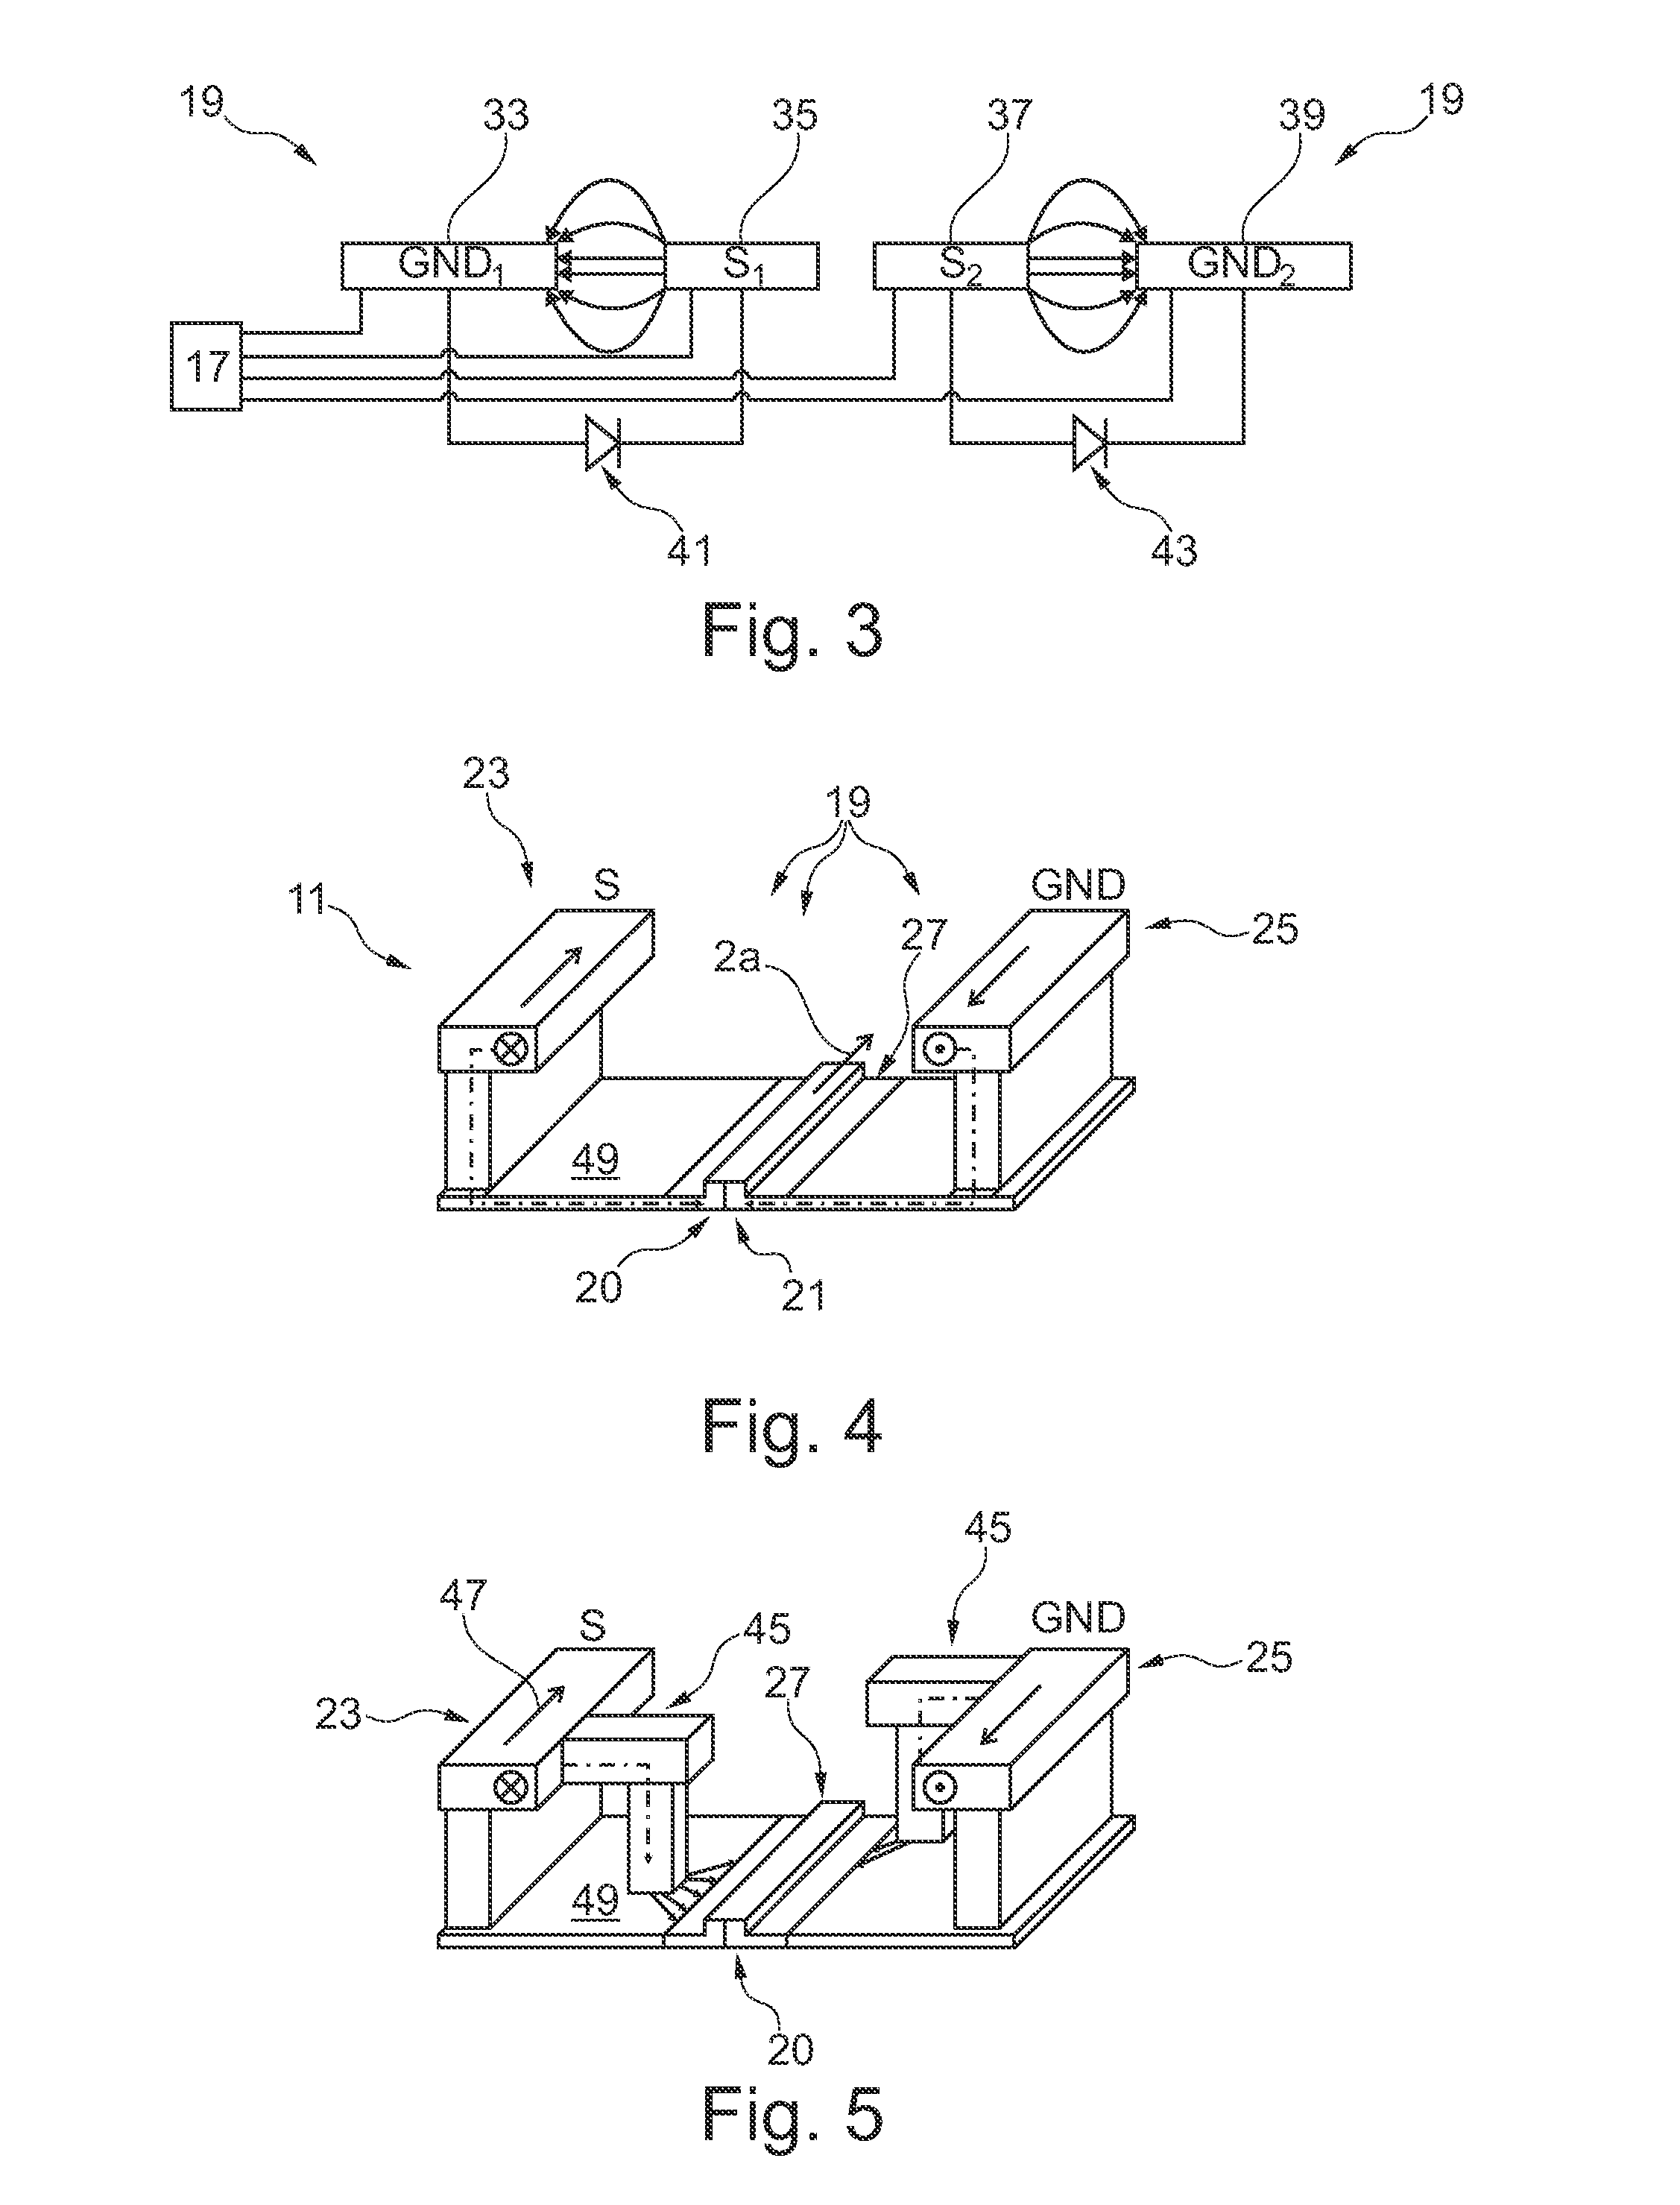 Electro-optical modulator based on carrier depletion or carrier accumulation in semiconductors with advanced electrode configuration